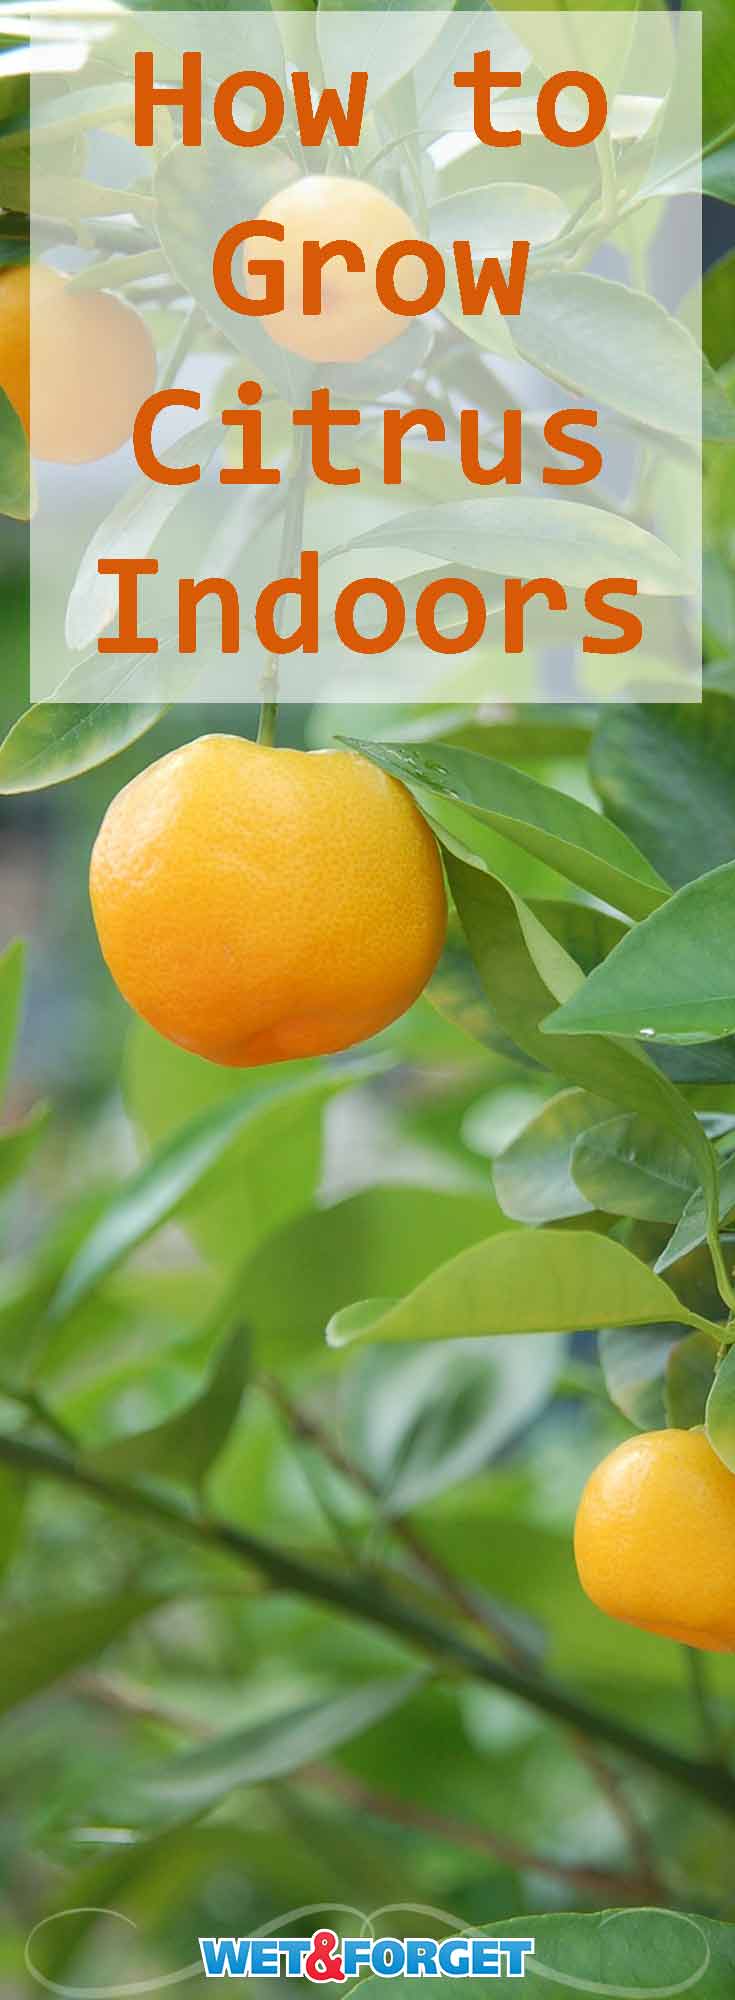 Learn all the tips and tricks for growing citrus plants indoors! They're both delicious and add decor to your home!